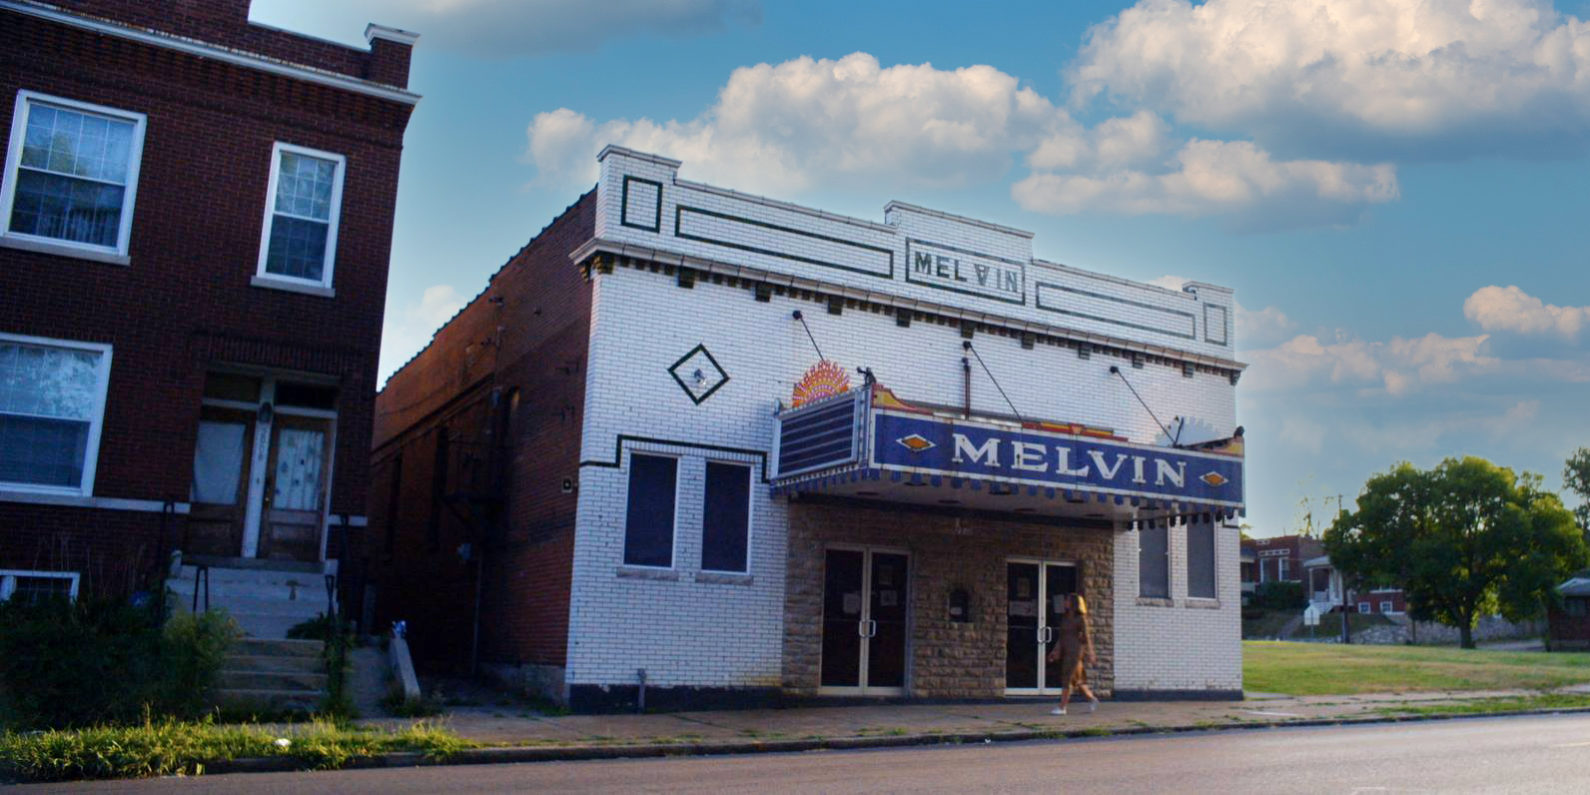 The Melvin Theater on Chippewa Street in Dutchtown, St. Louis, MO. Photo by Michael Allen.